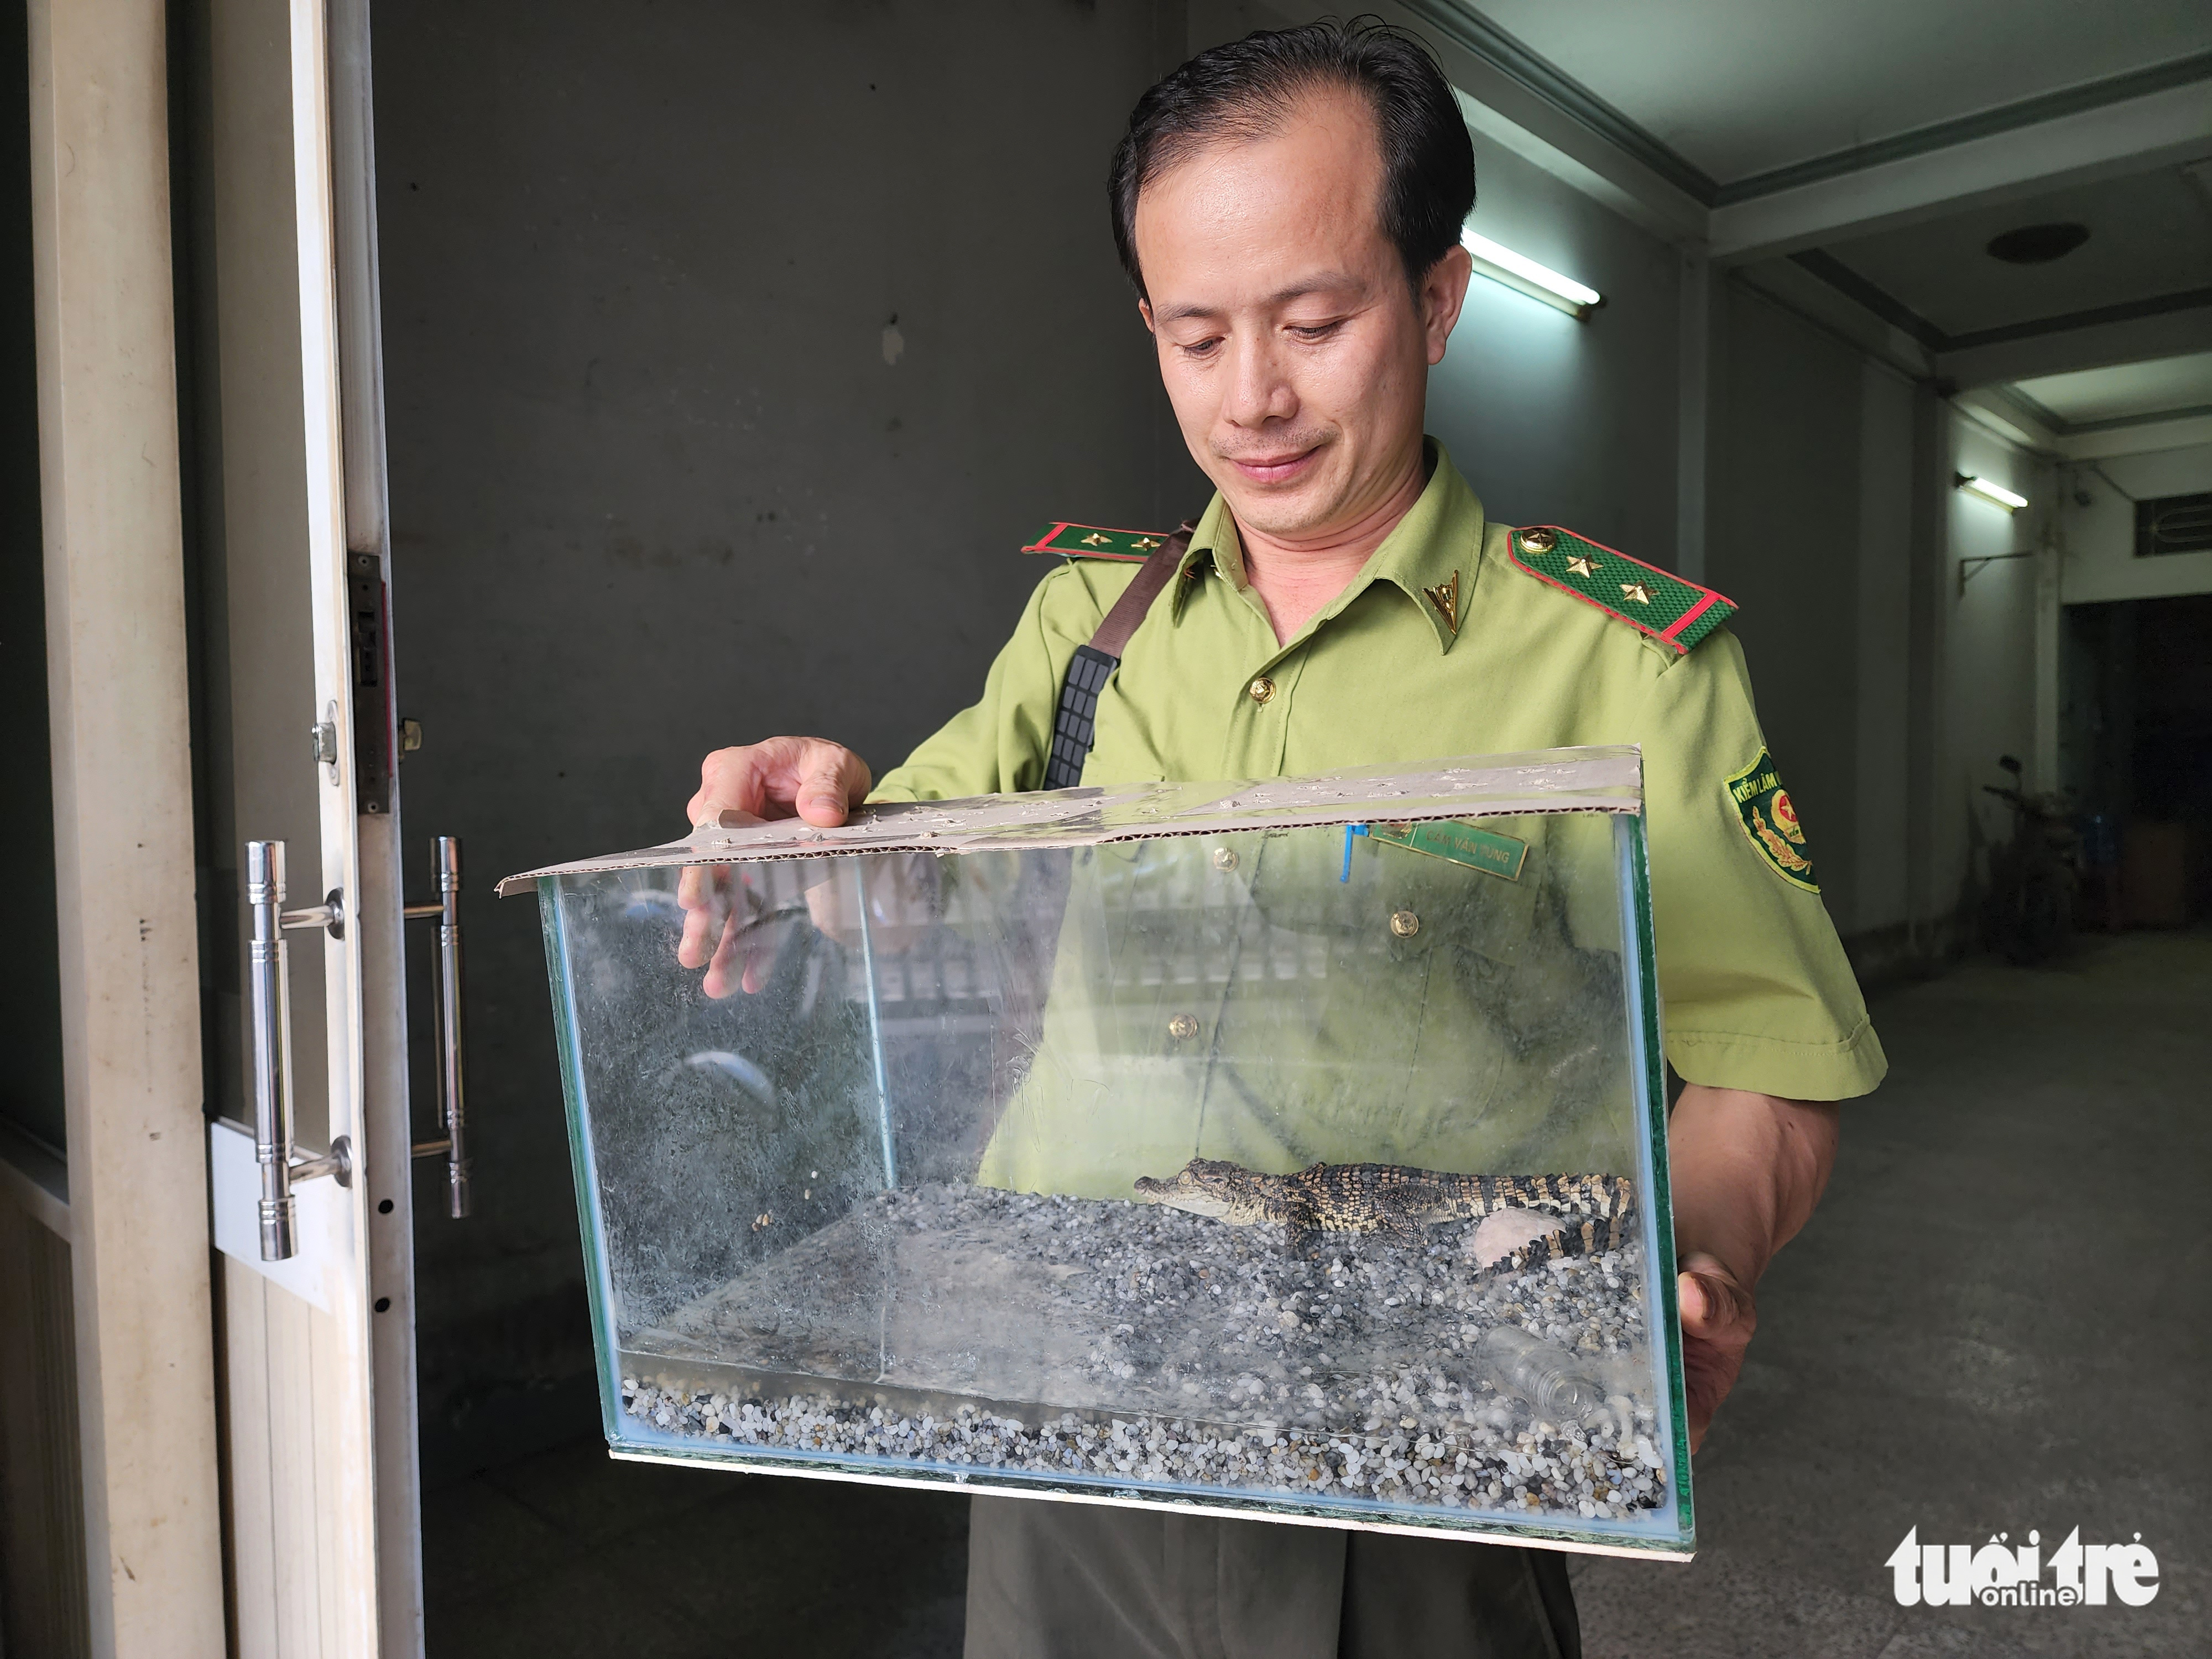 A ranger receives a glass tank containing a rare, endangered crocodile kept at the house of Le Thanh Hoa in Hoc Mon District, Ho Chi Minh City. Photo taken on July 29, 2022. Photo: Ngoc Khai / Tuoi Tre